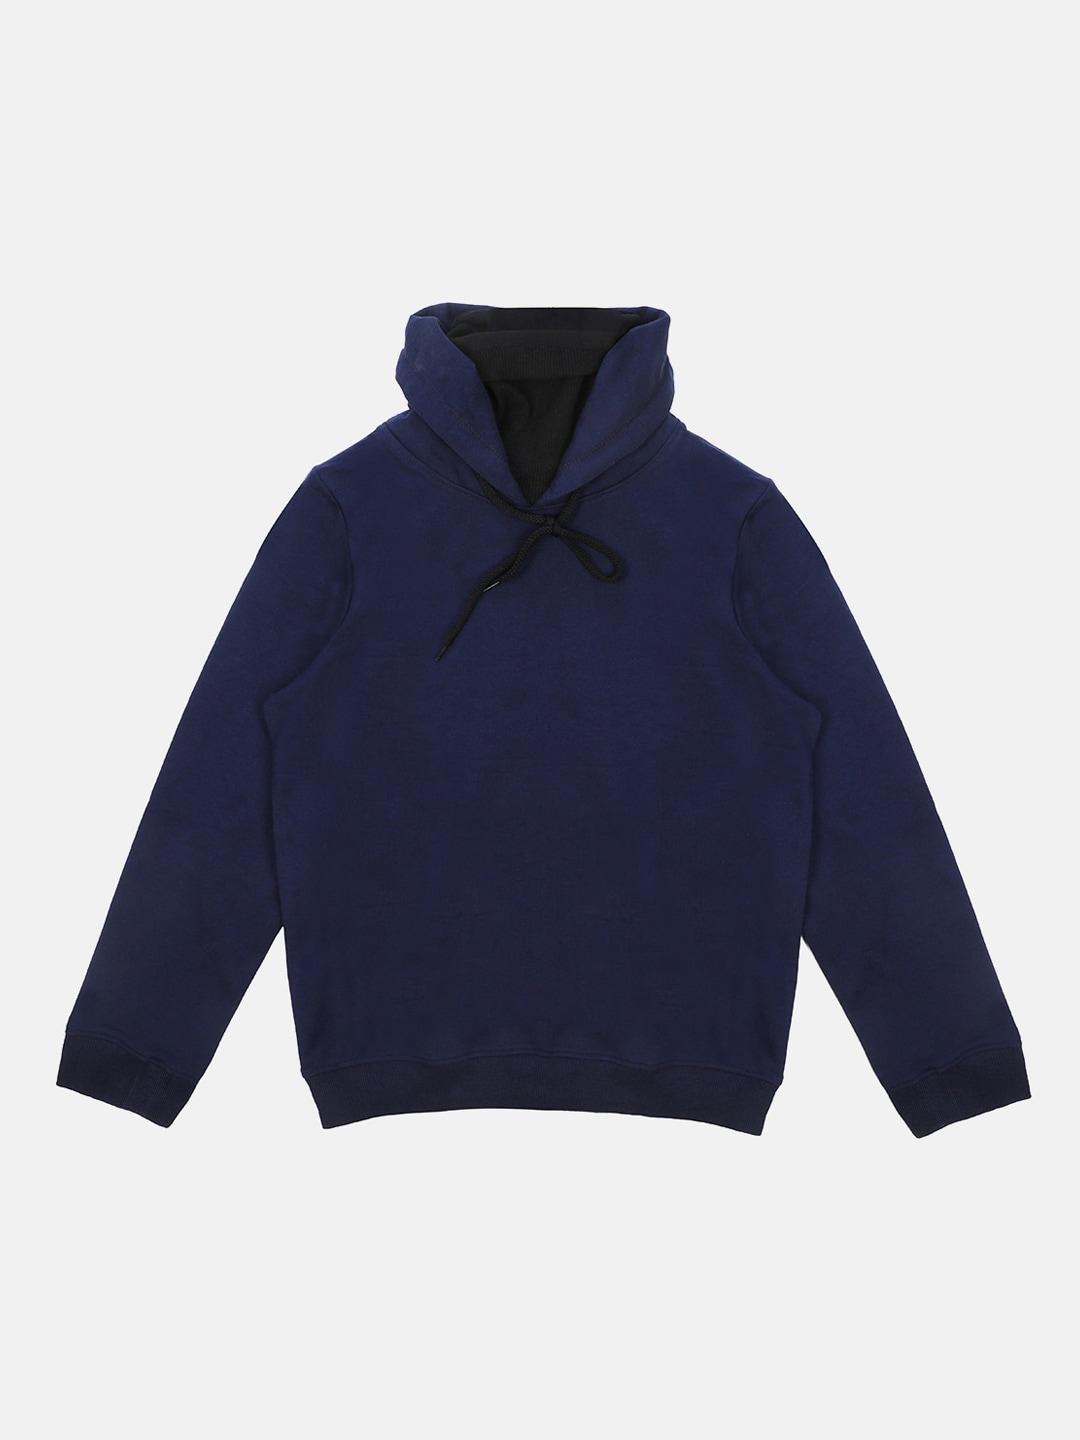 Wear Your Mind Boys Navy Blue Solid Hooded Sweatshirt With Attached Face Covering